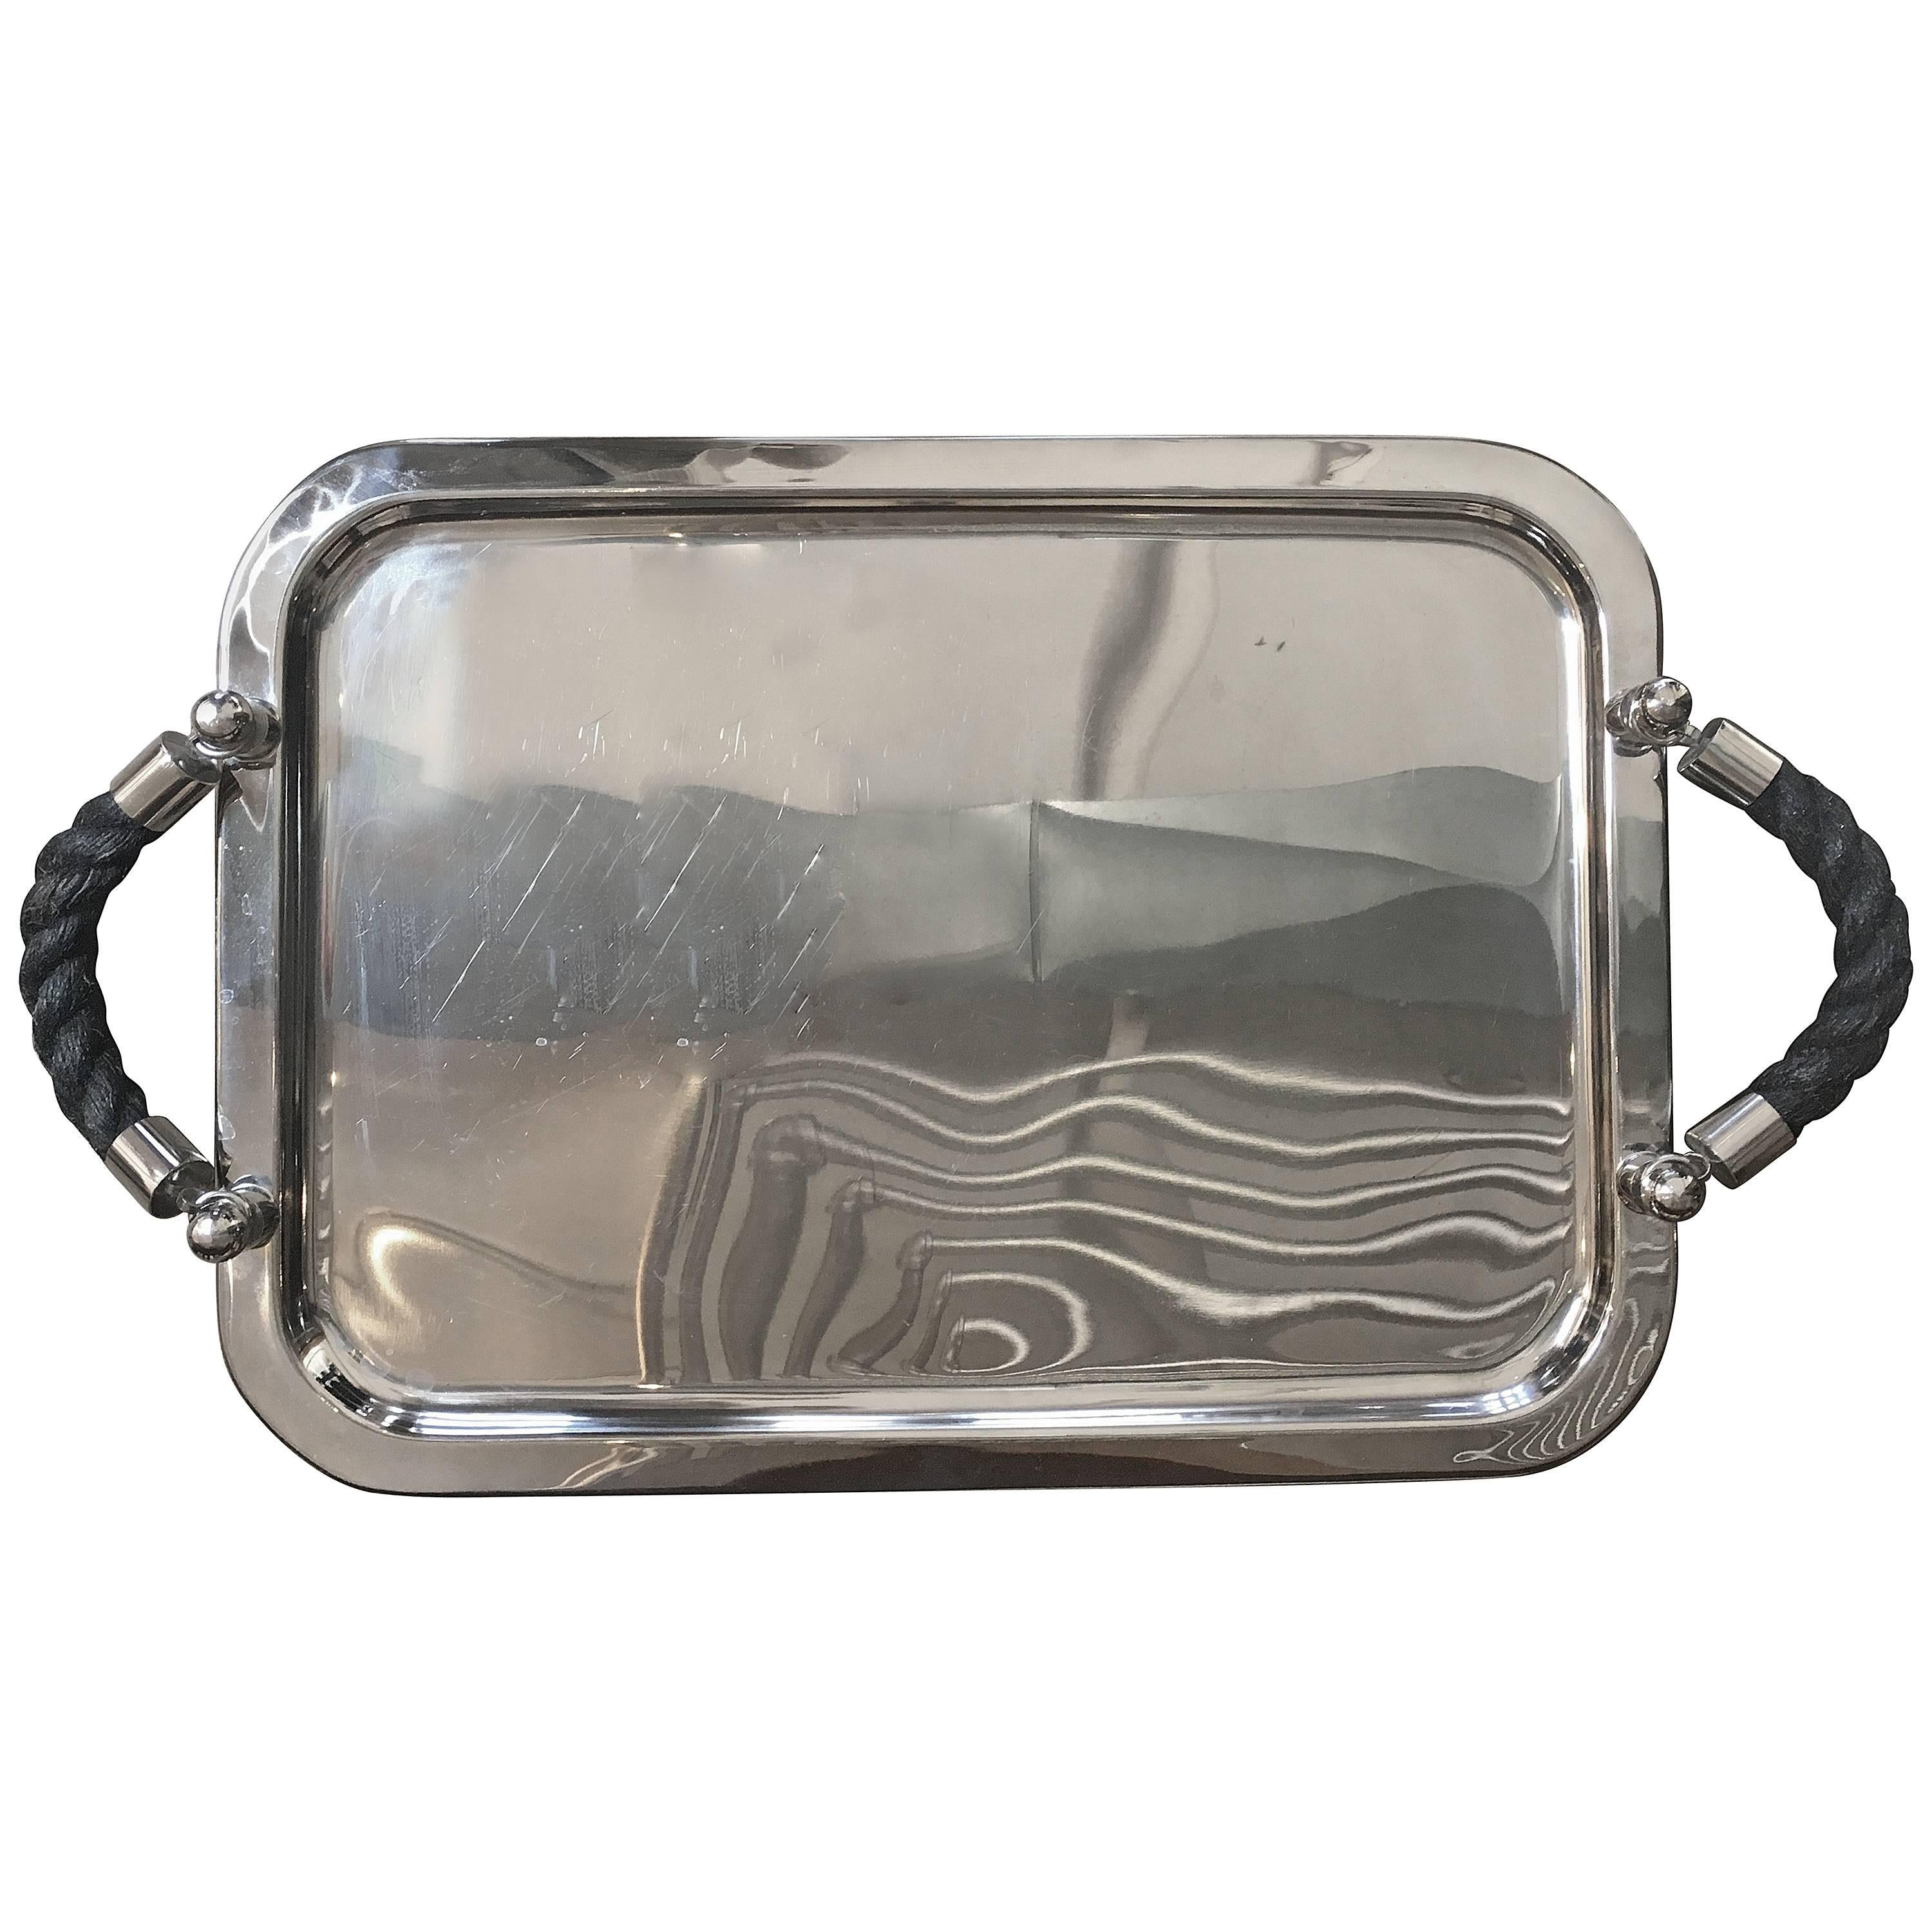 Malibu Tray in Black, Stainless Steel with Black Rope Handles For Sale